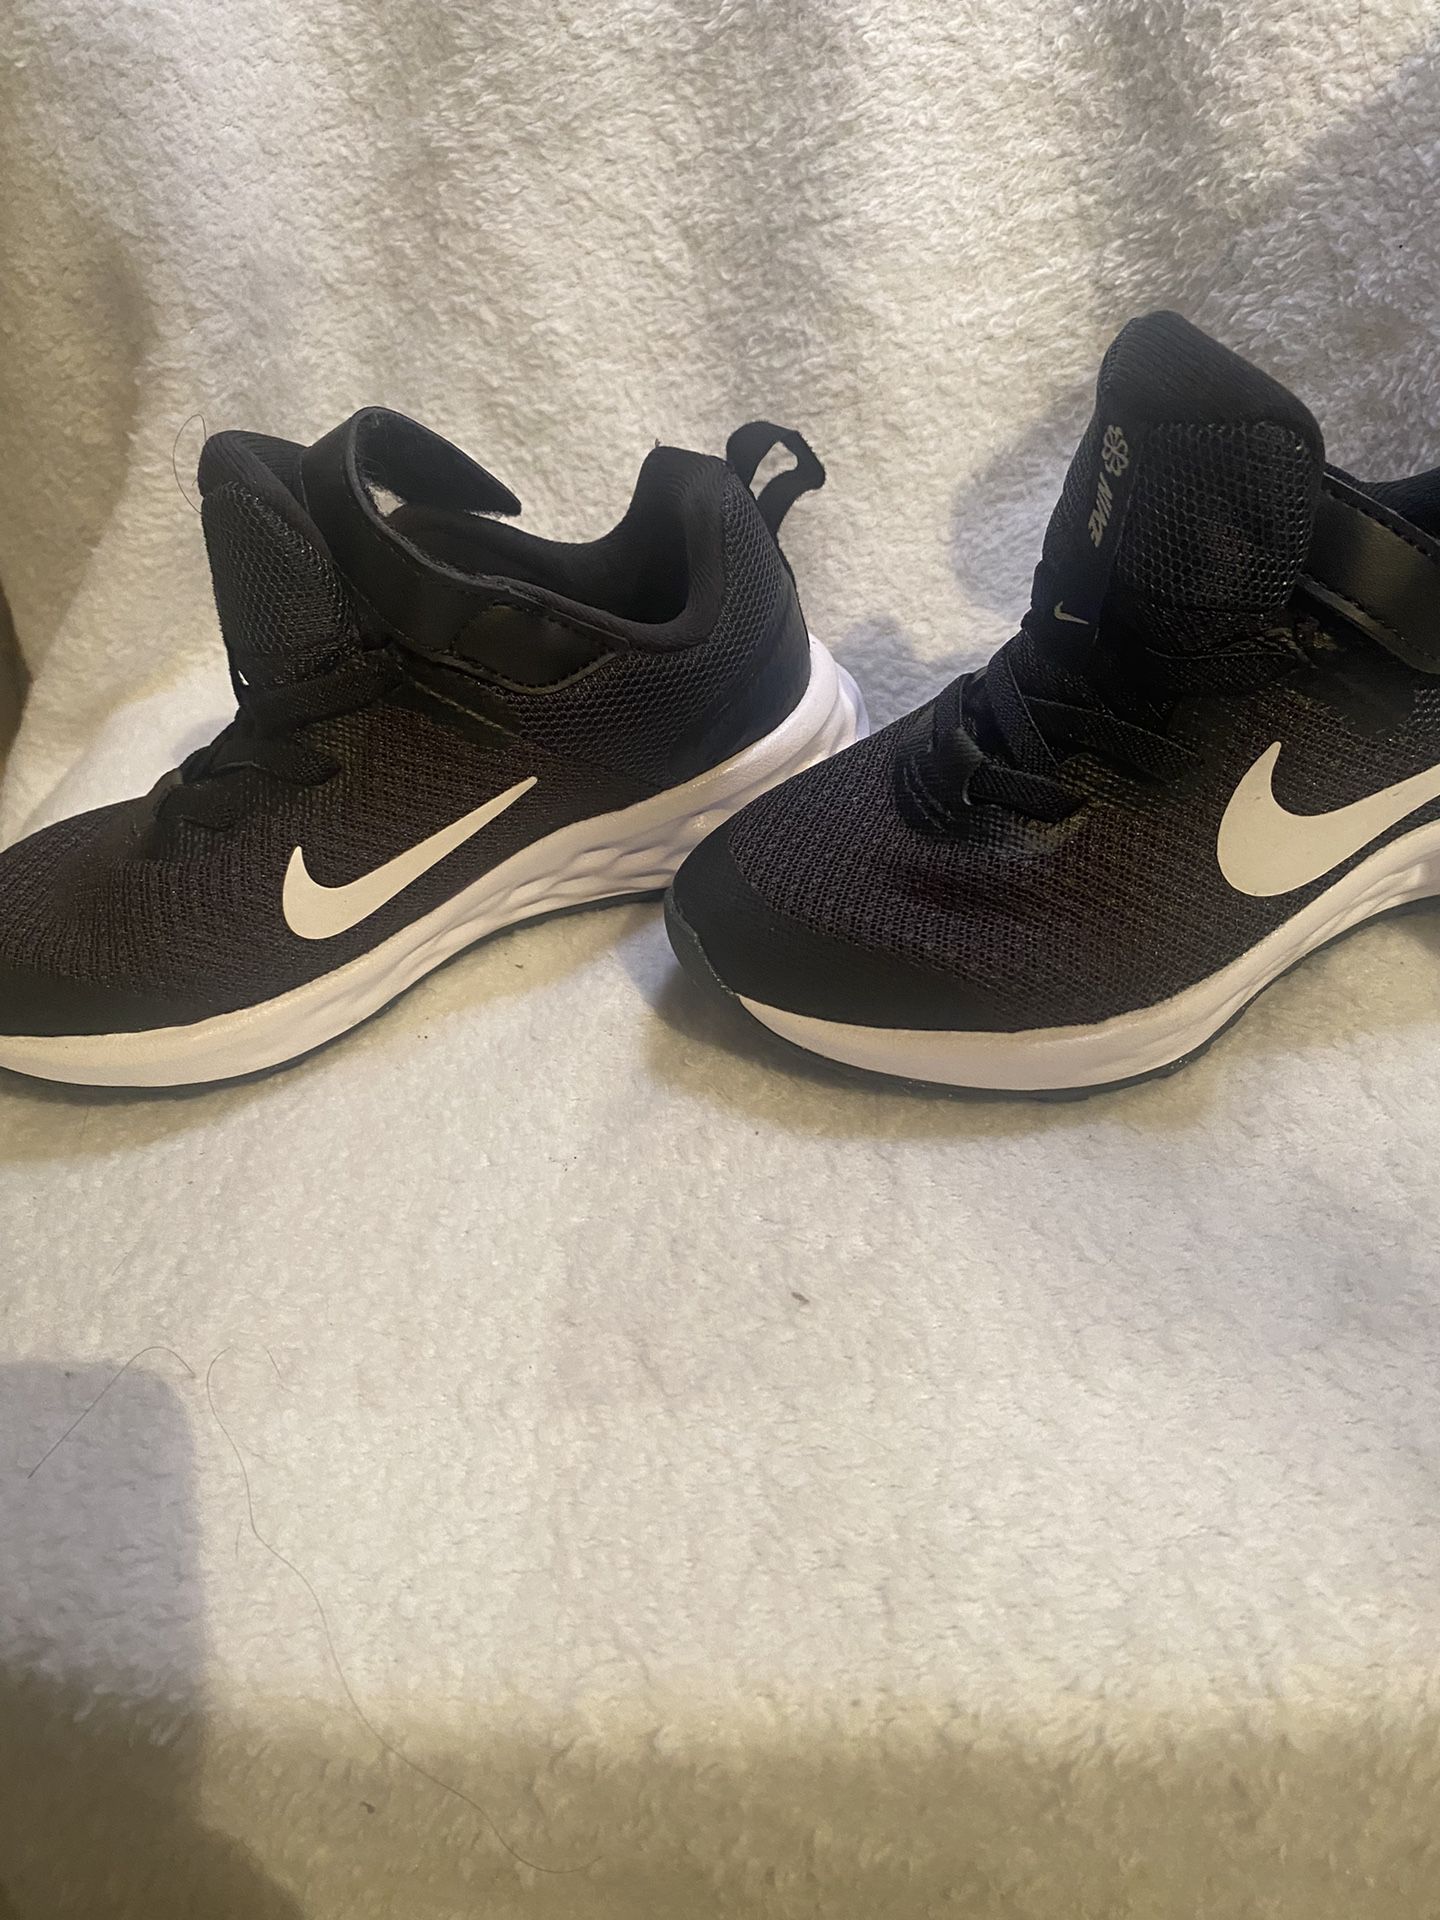 Nike running shoes youth